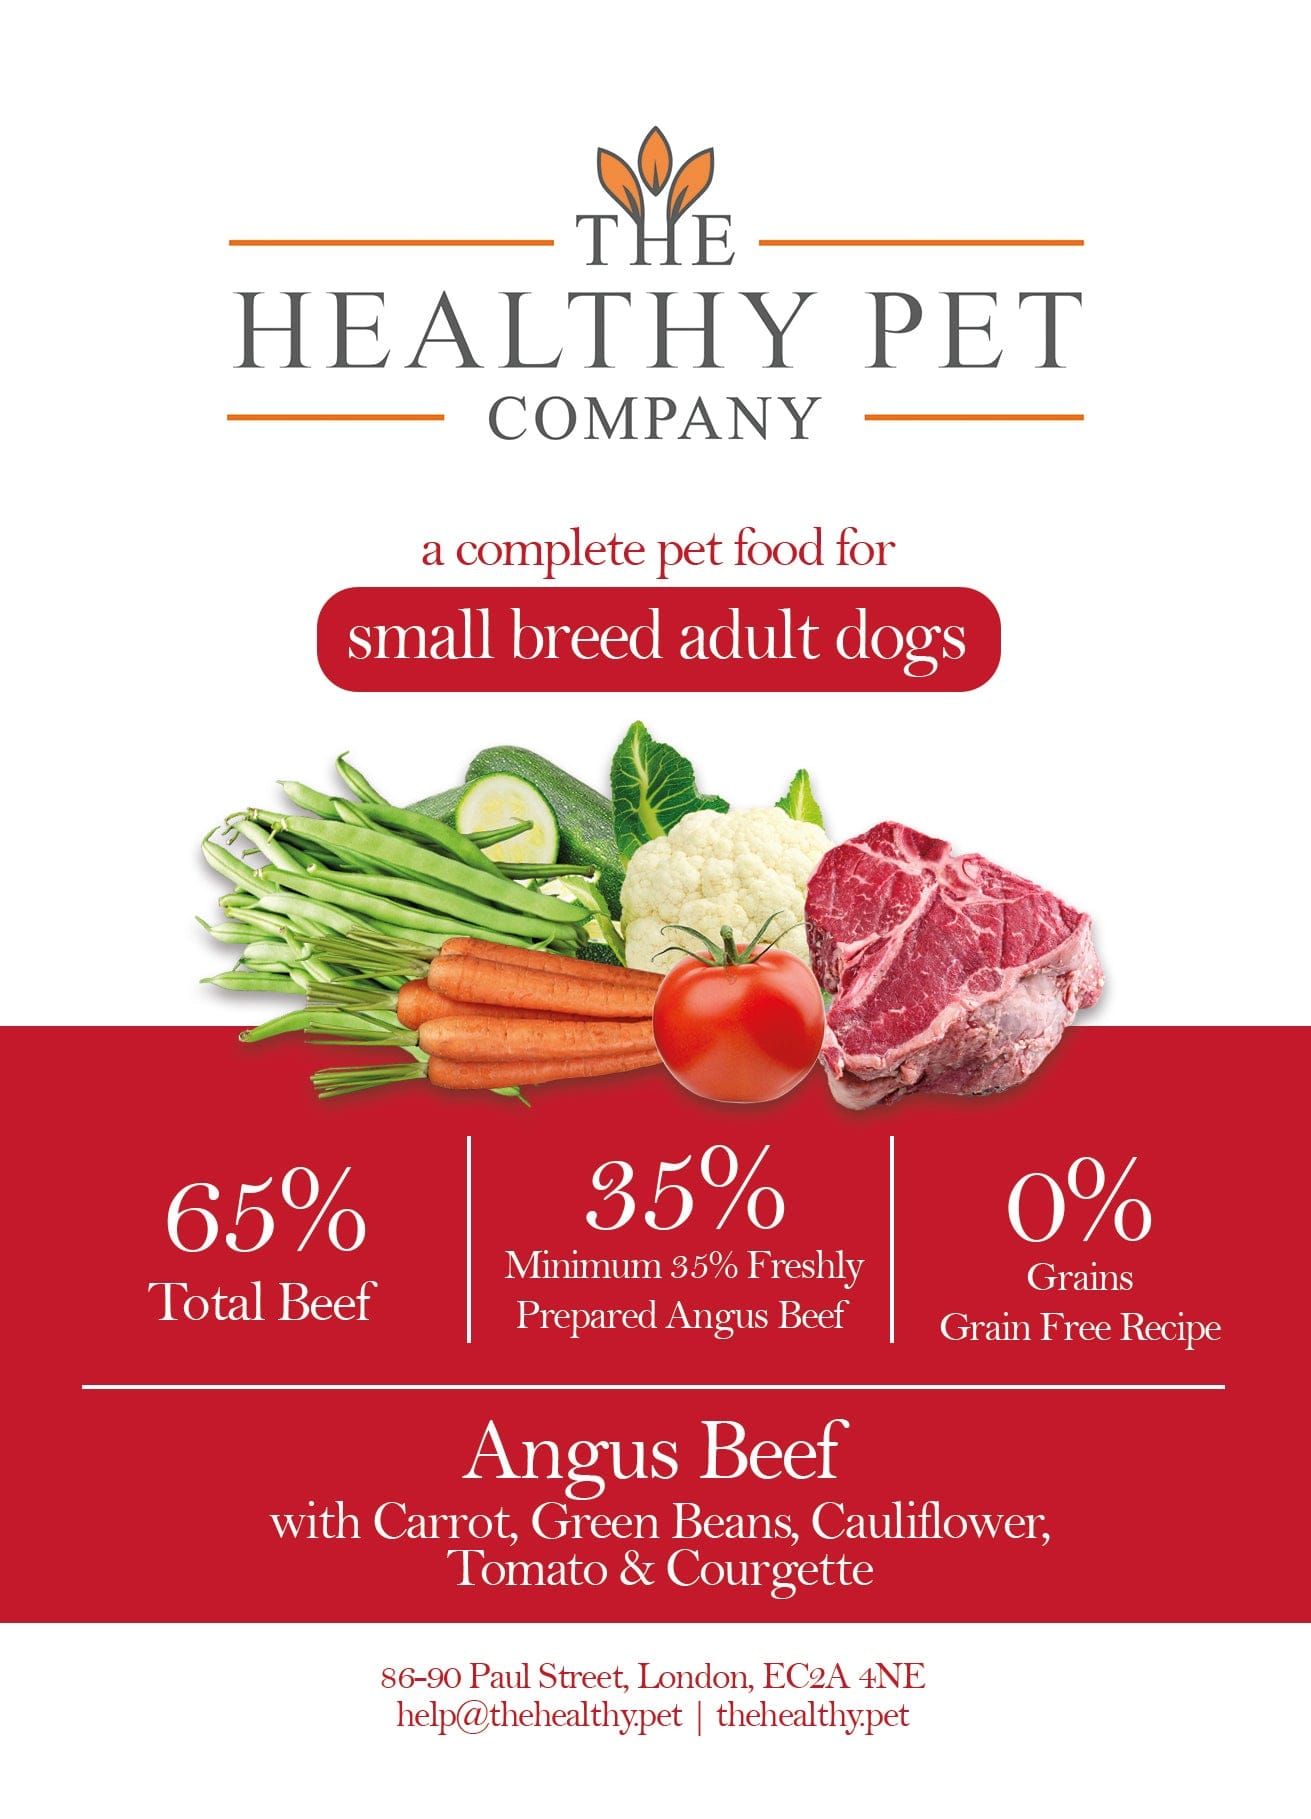 The Healthy Pet Company Complete Meal - Grain-Free Beef & Veg for Small Adult Breeds - The Healthy Pet Company